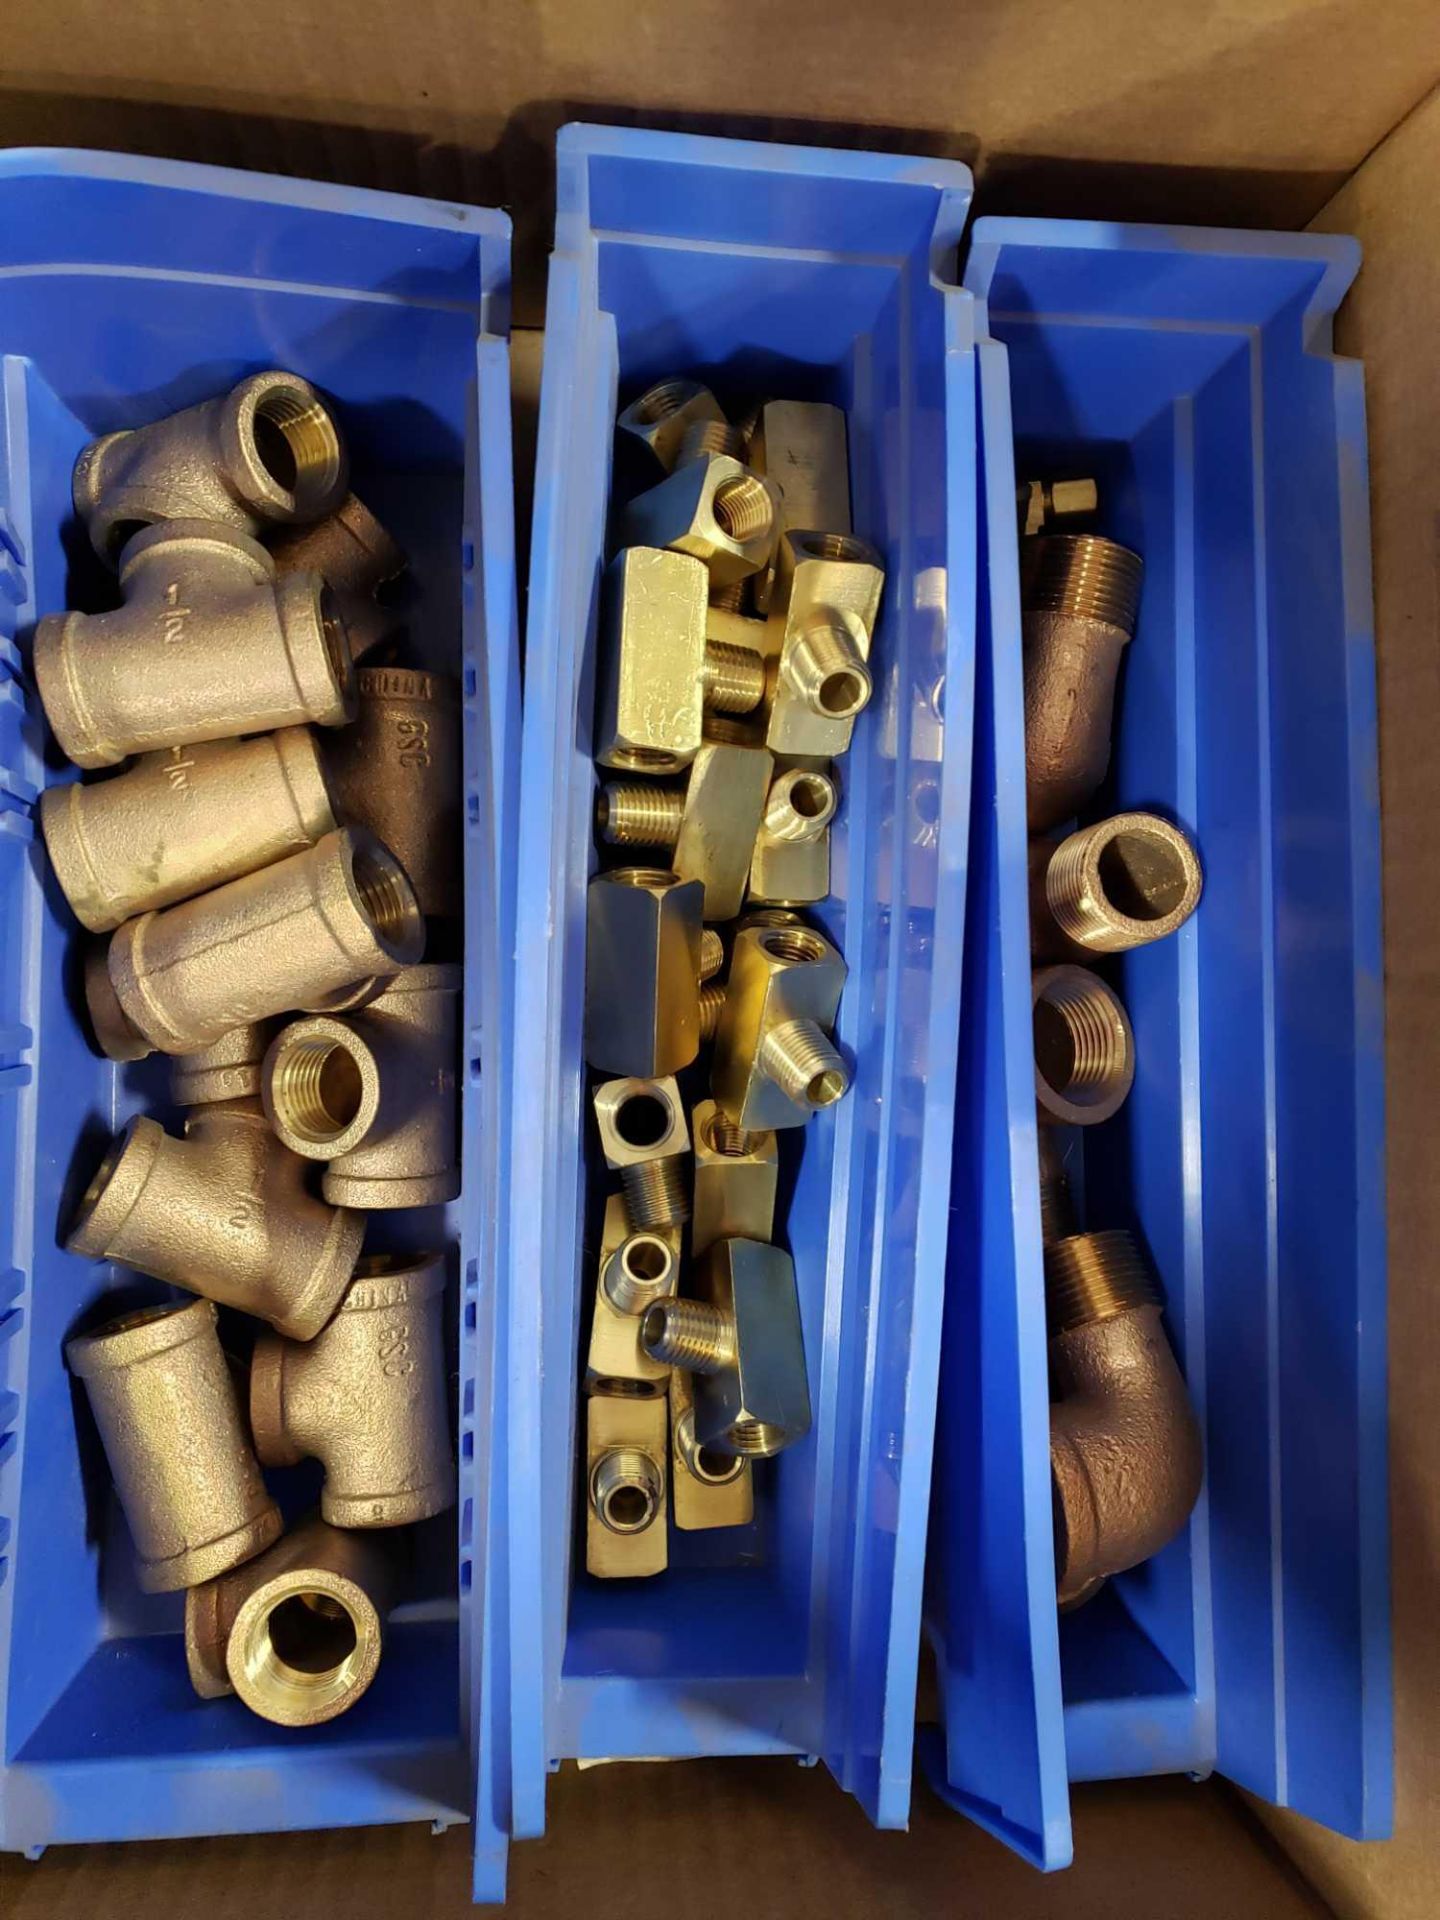 Lot of assorted hydraulic fittings, some brass. New as pictured. - Image 3 of 3